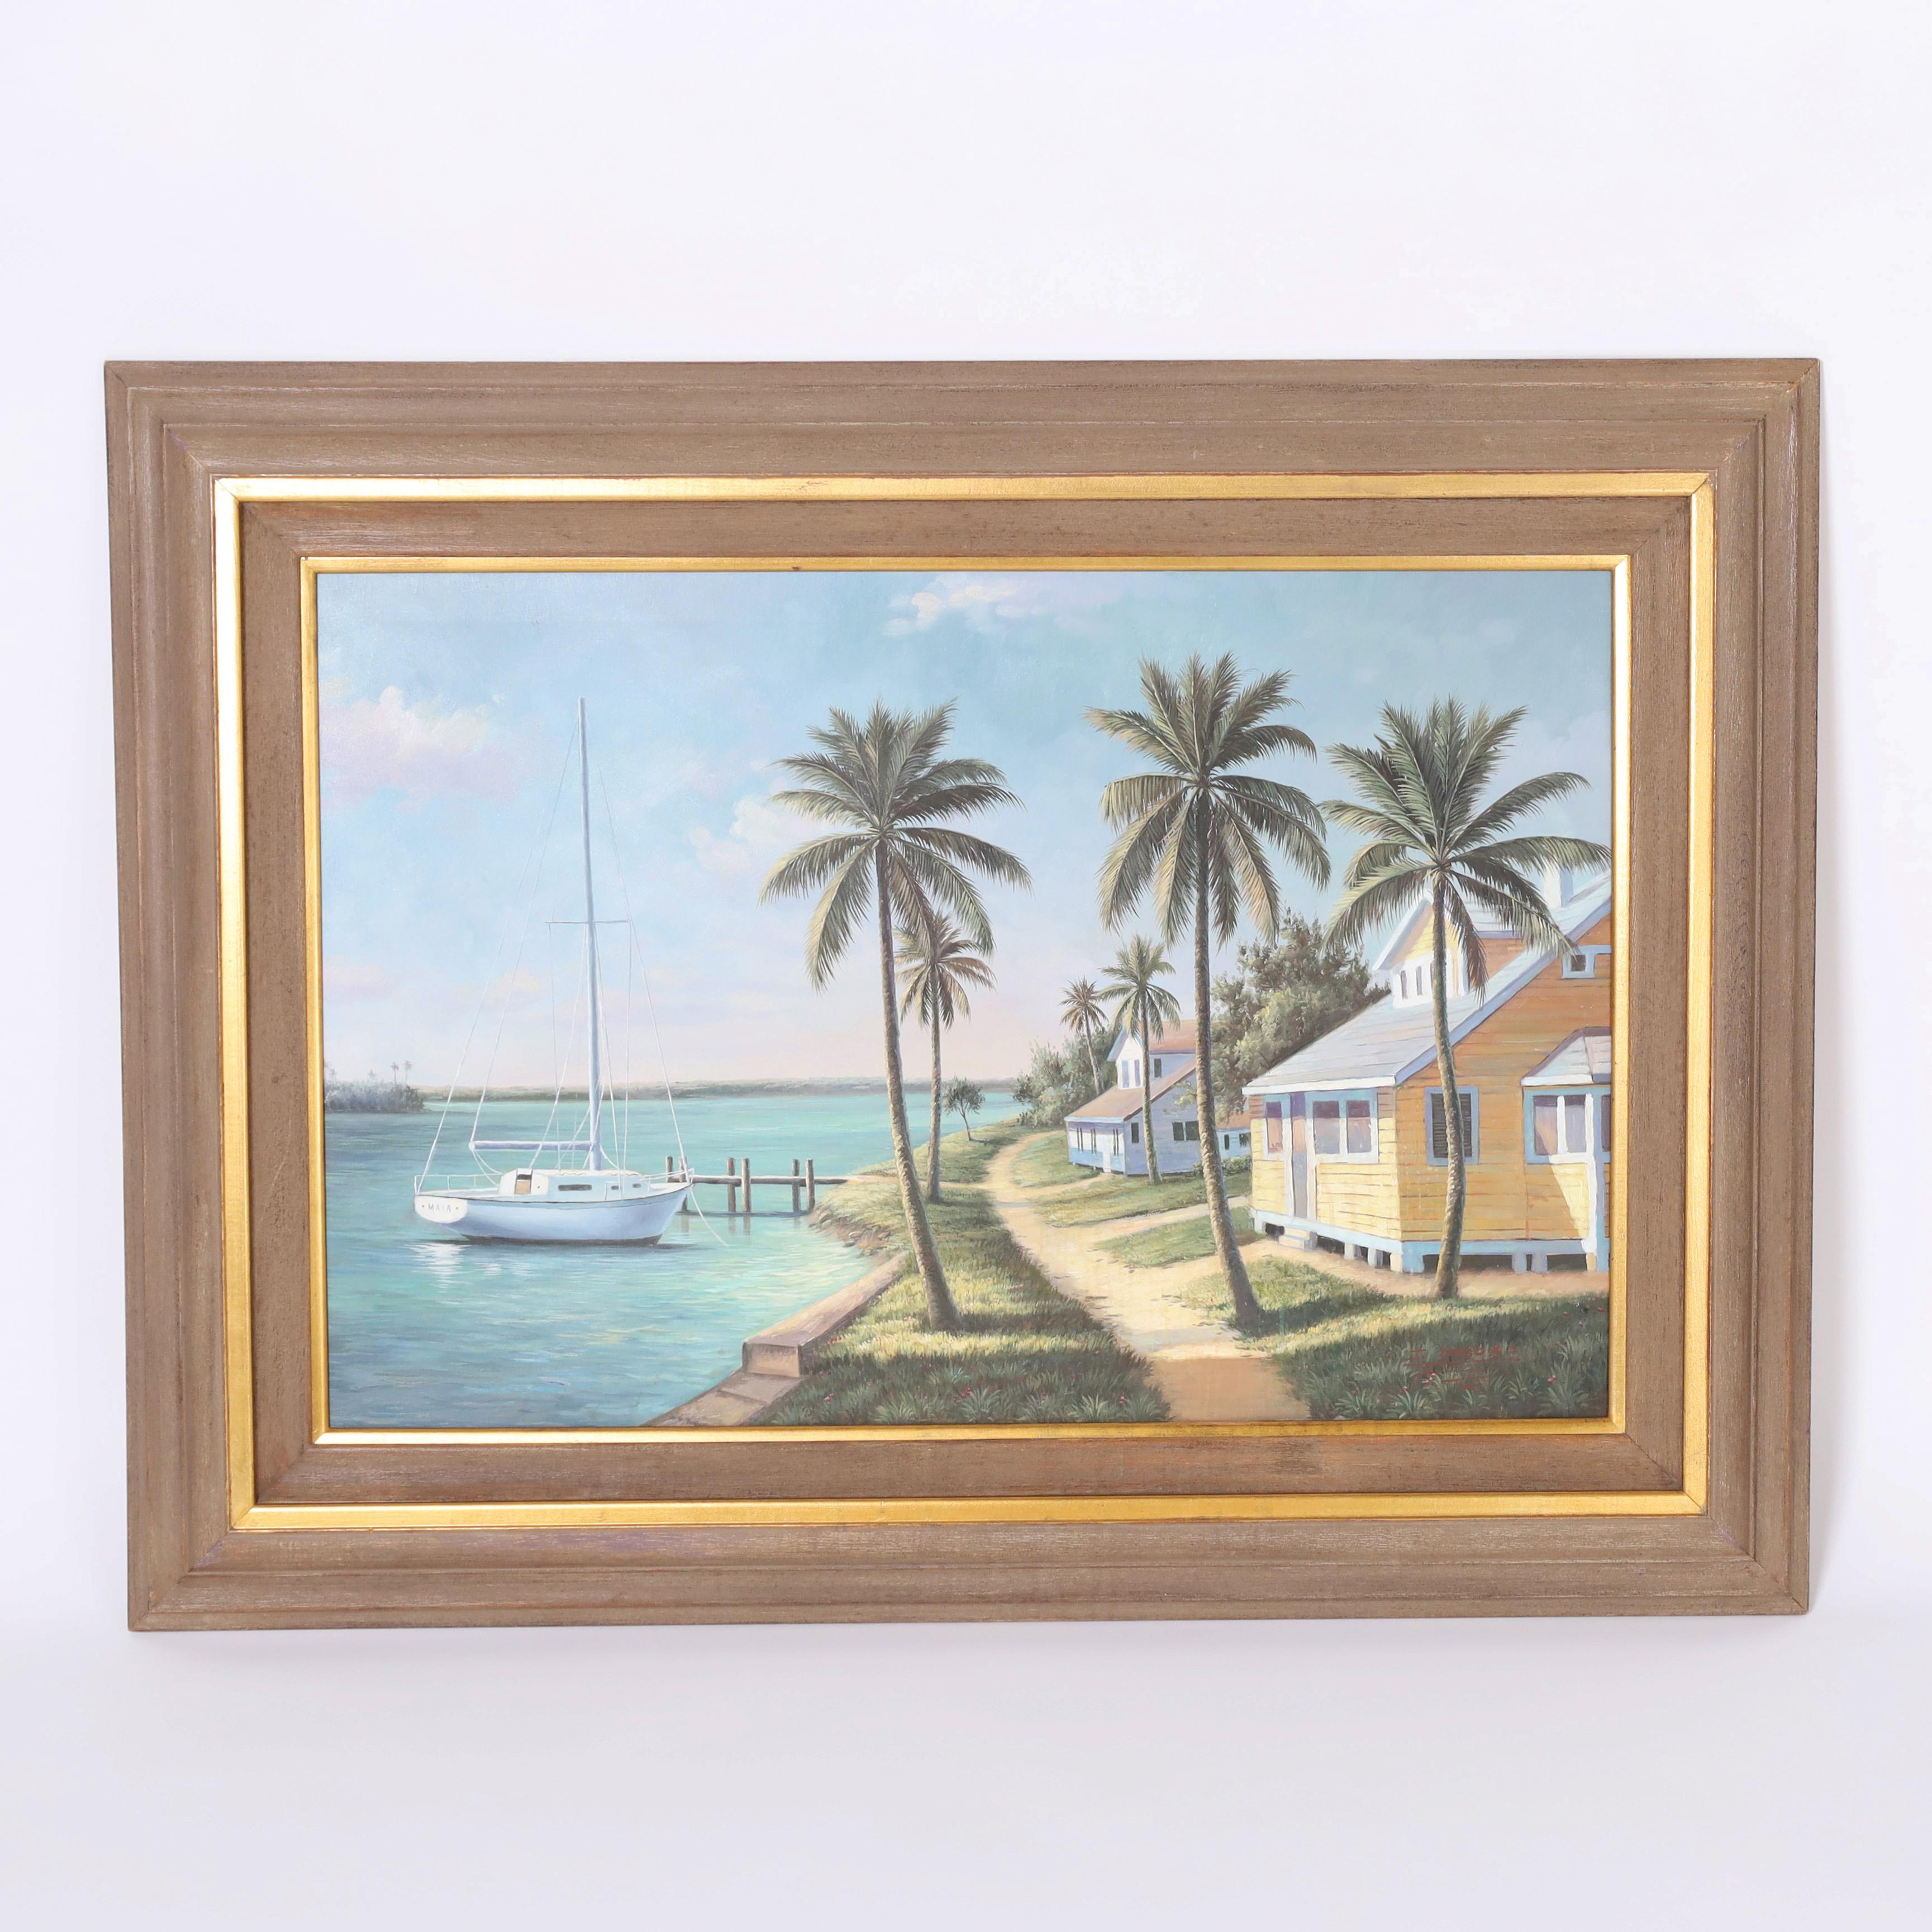 Unknown Landscape Painting - Vintage Oil Painting on Canvas of a Tropical Bayscape